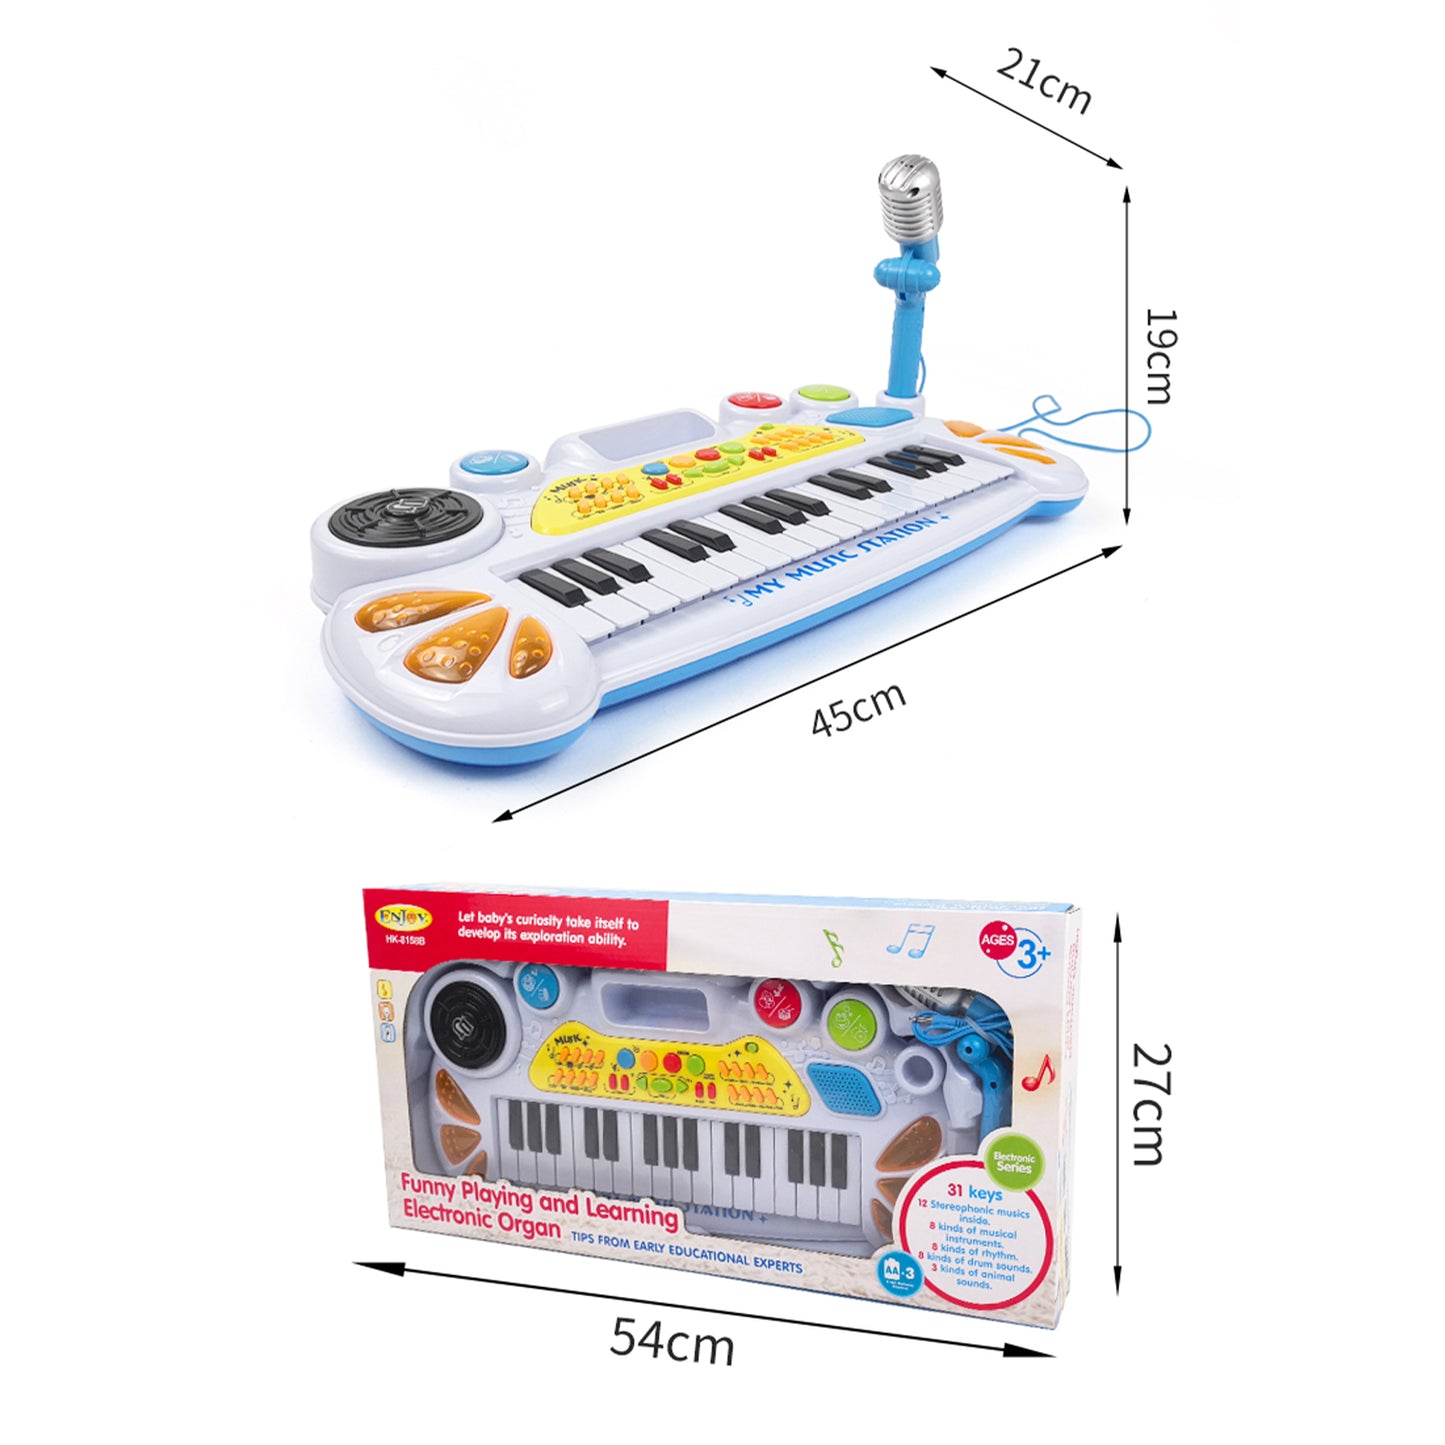 AOQIMITENJOY Musical Instrument Electronic 31 Keys Keyboard Toys with BracketLED Lighting Children's Toys Birthday Gifts for Boys and Girls 3 Year Old+ HK-8158B